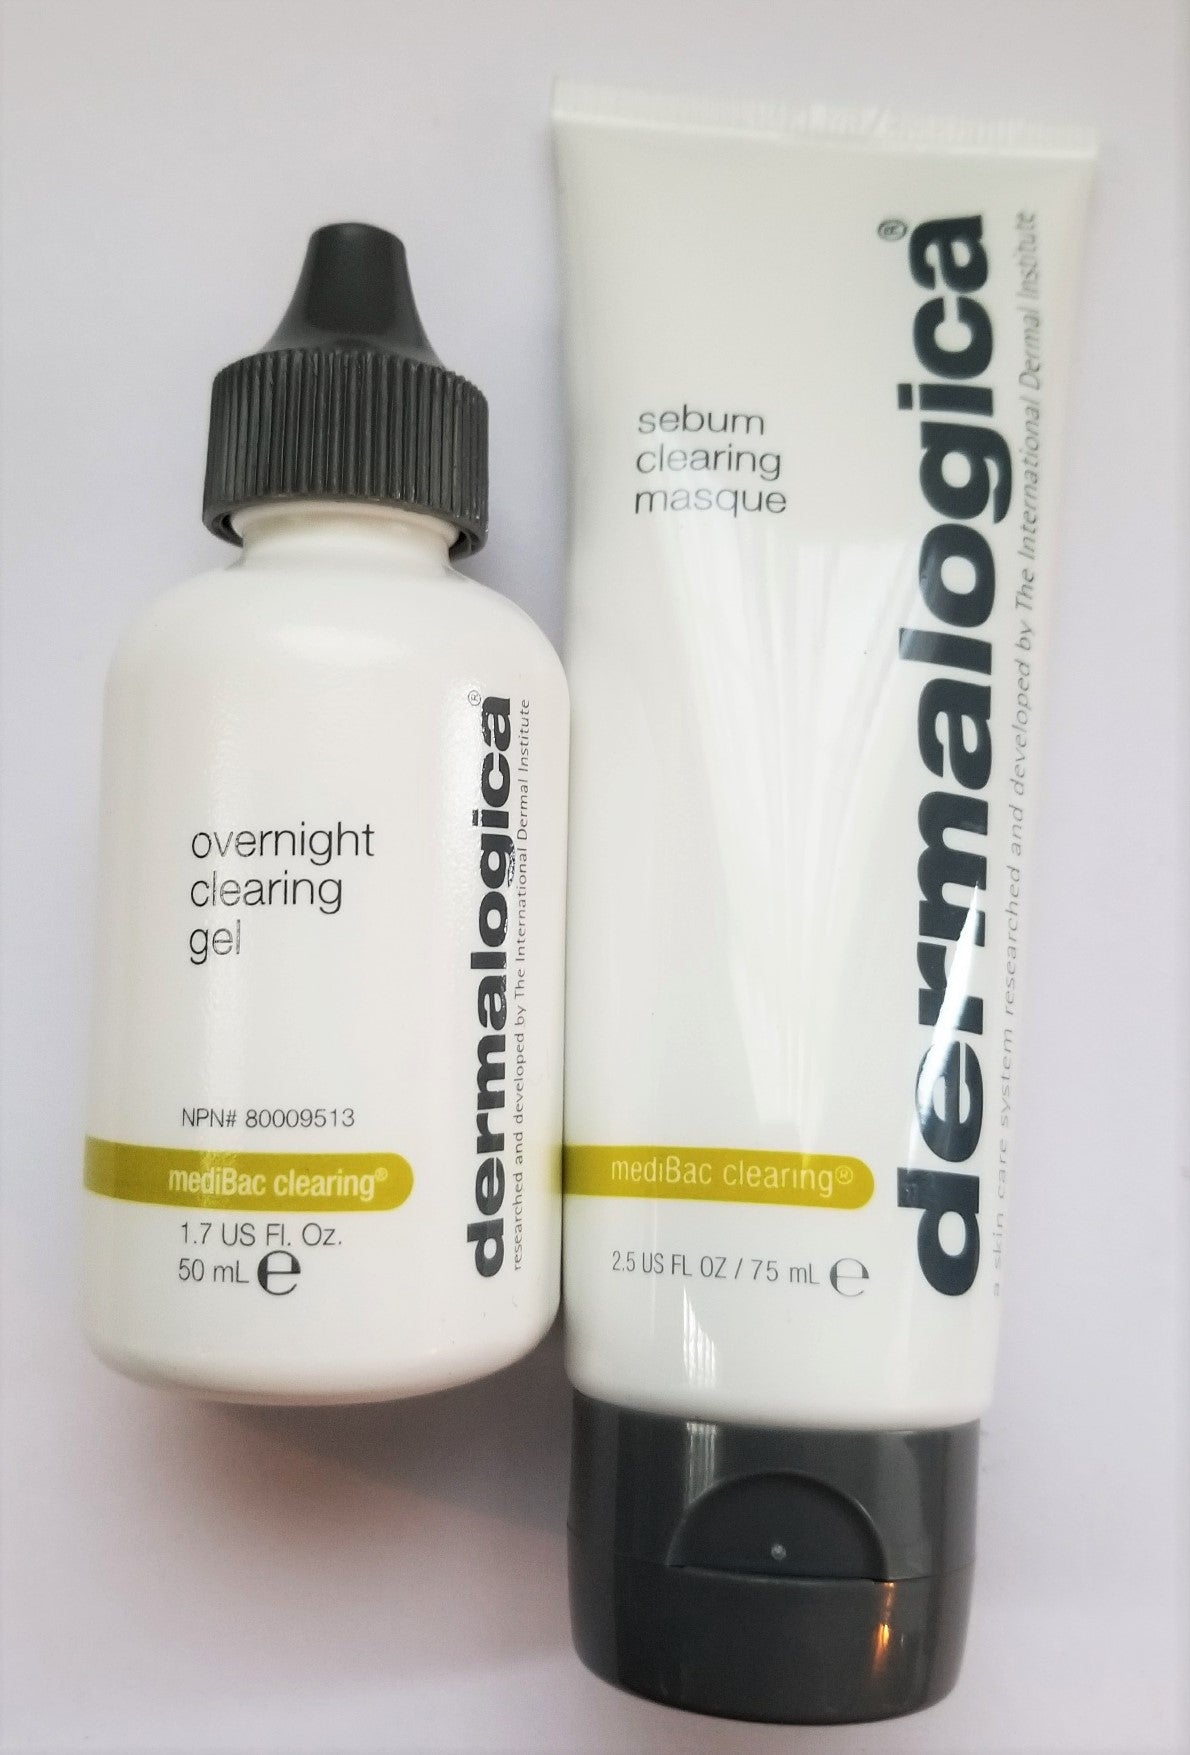 Review, Ingredients, Photos, Swatches, Skincare Trend 2017, 2018: Dermalogica Sebum Clearing Masque, Overnight Clearing Gel, Acne, Pores, Oily Skin, Face Mask, Cystic Acne, Blackheads, Pimples, Luxury Skincare, Clear Skin